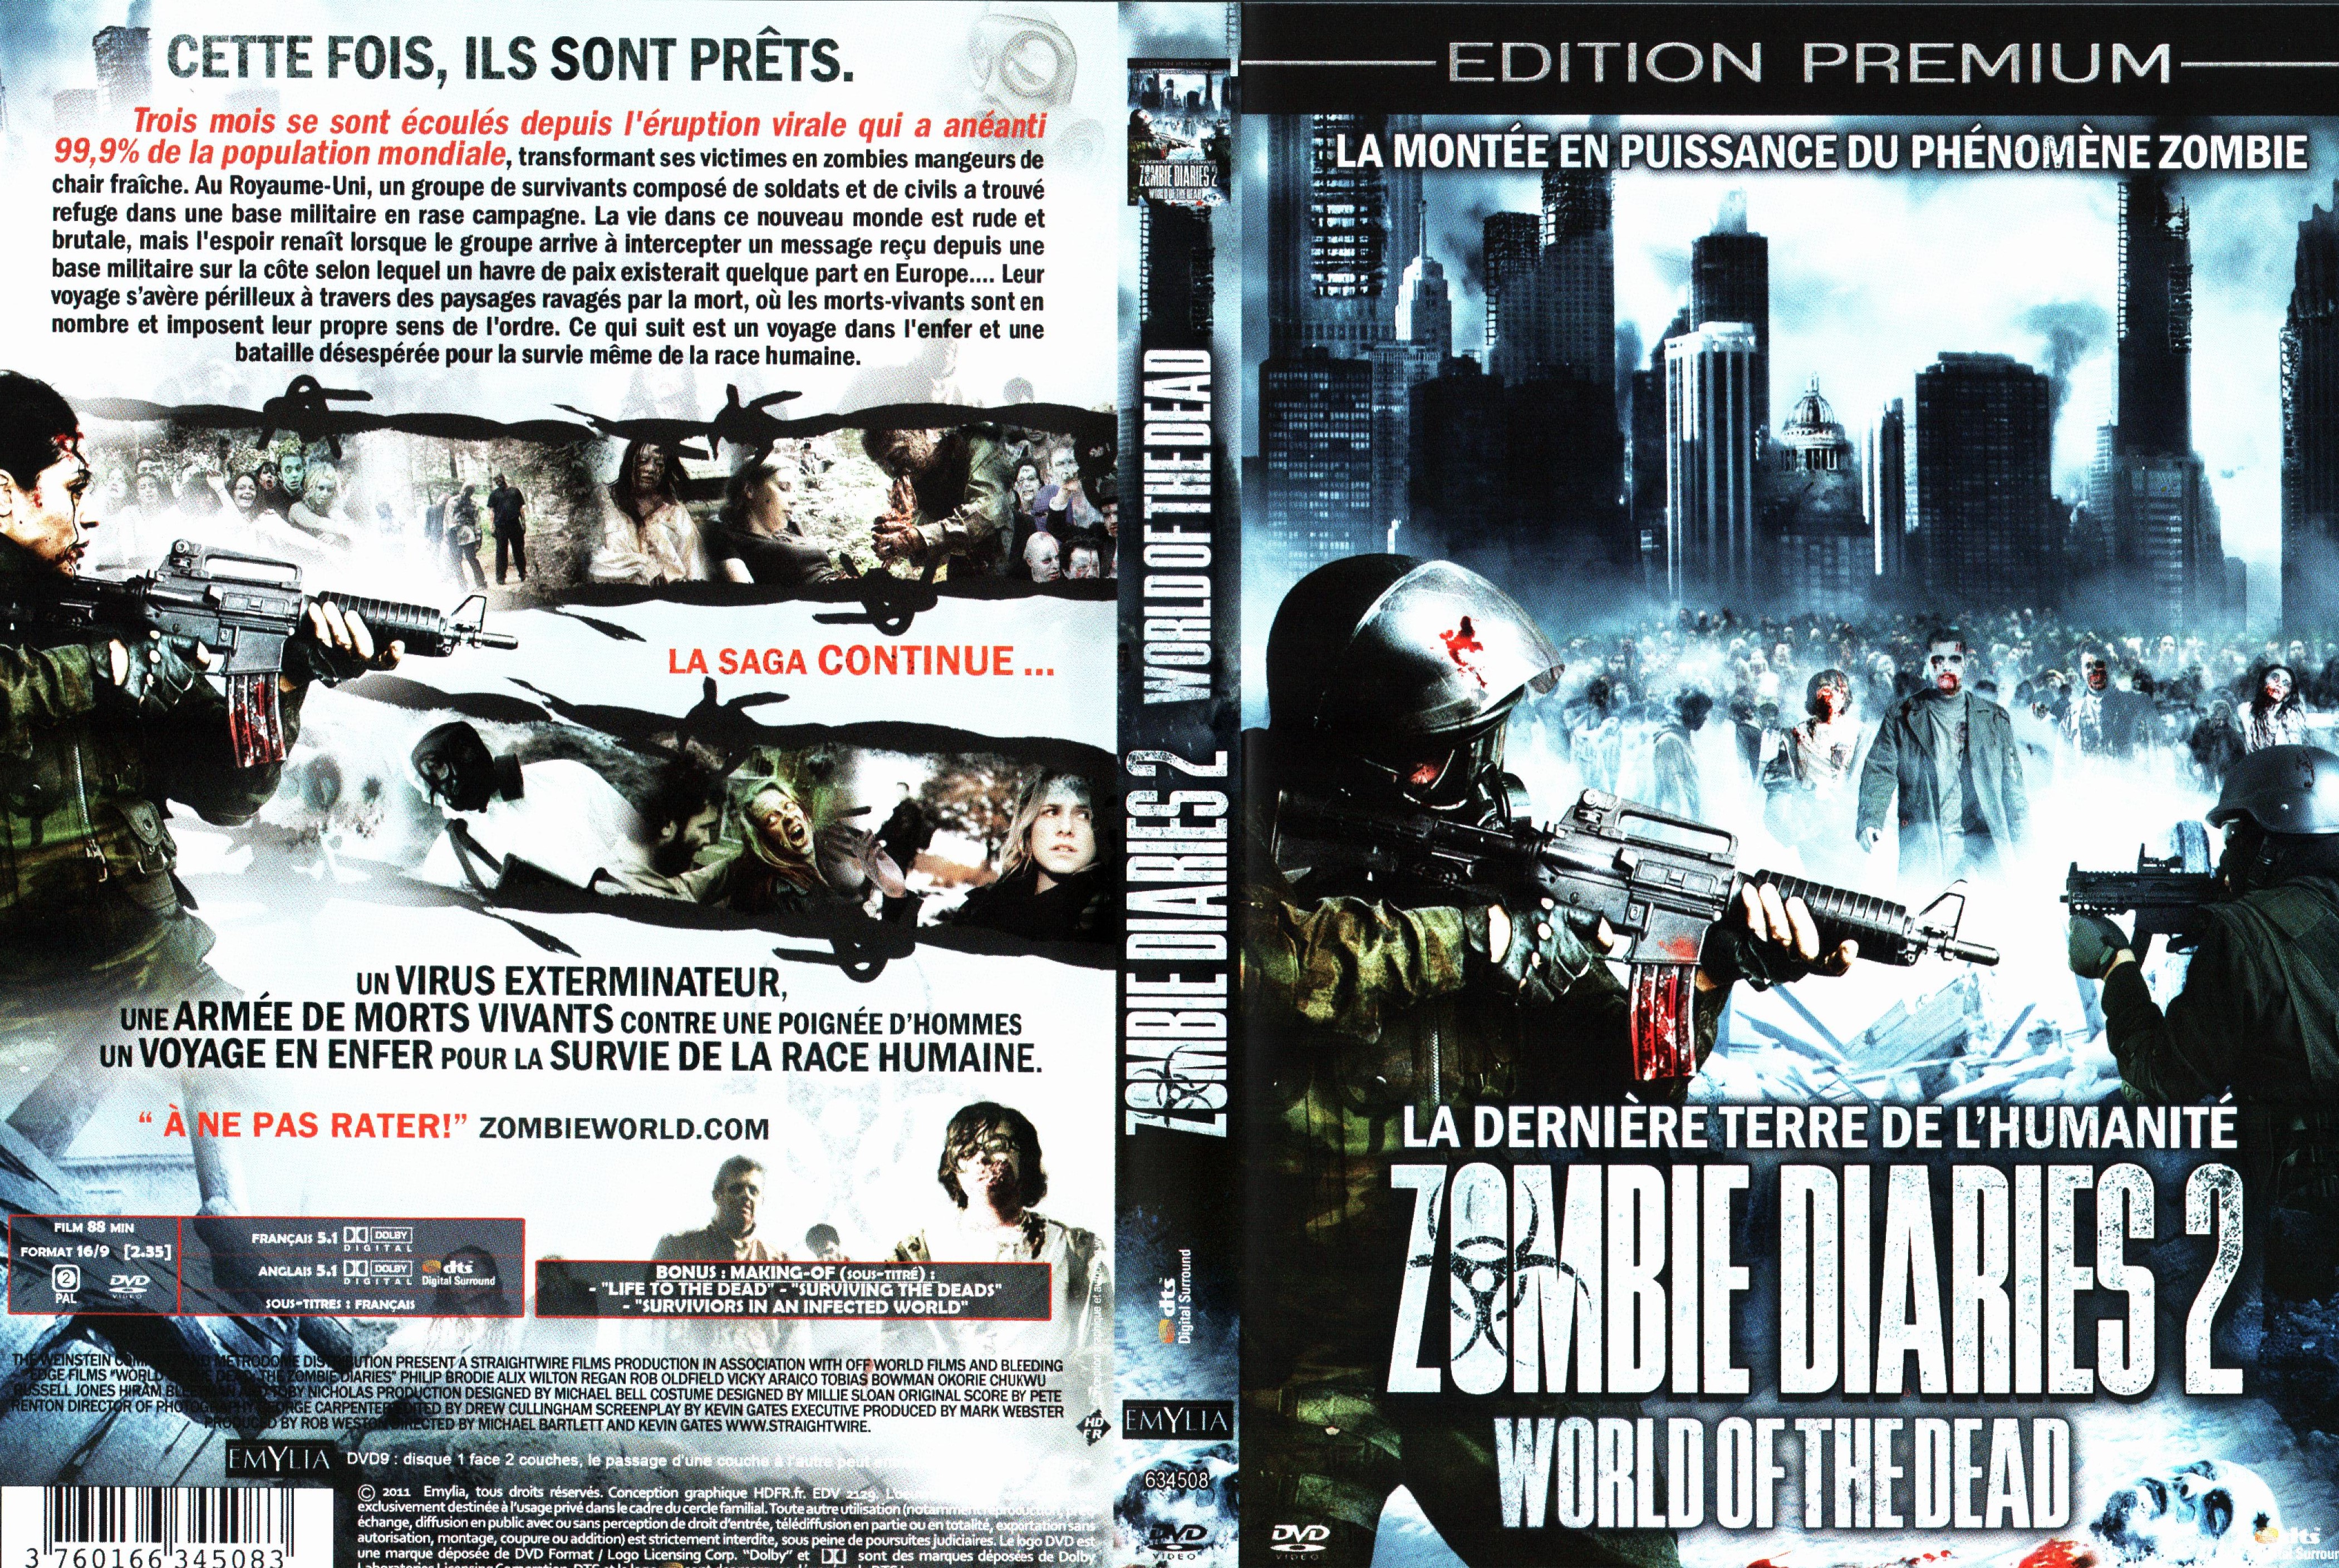 Jaquette DVD Zombie Diaries 2 World of the Dead